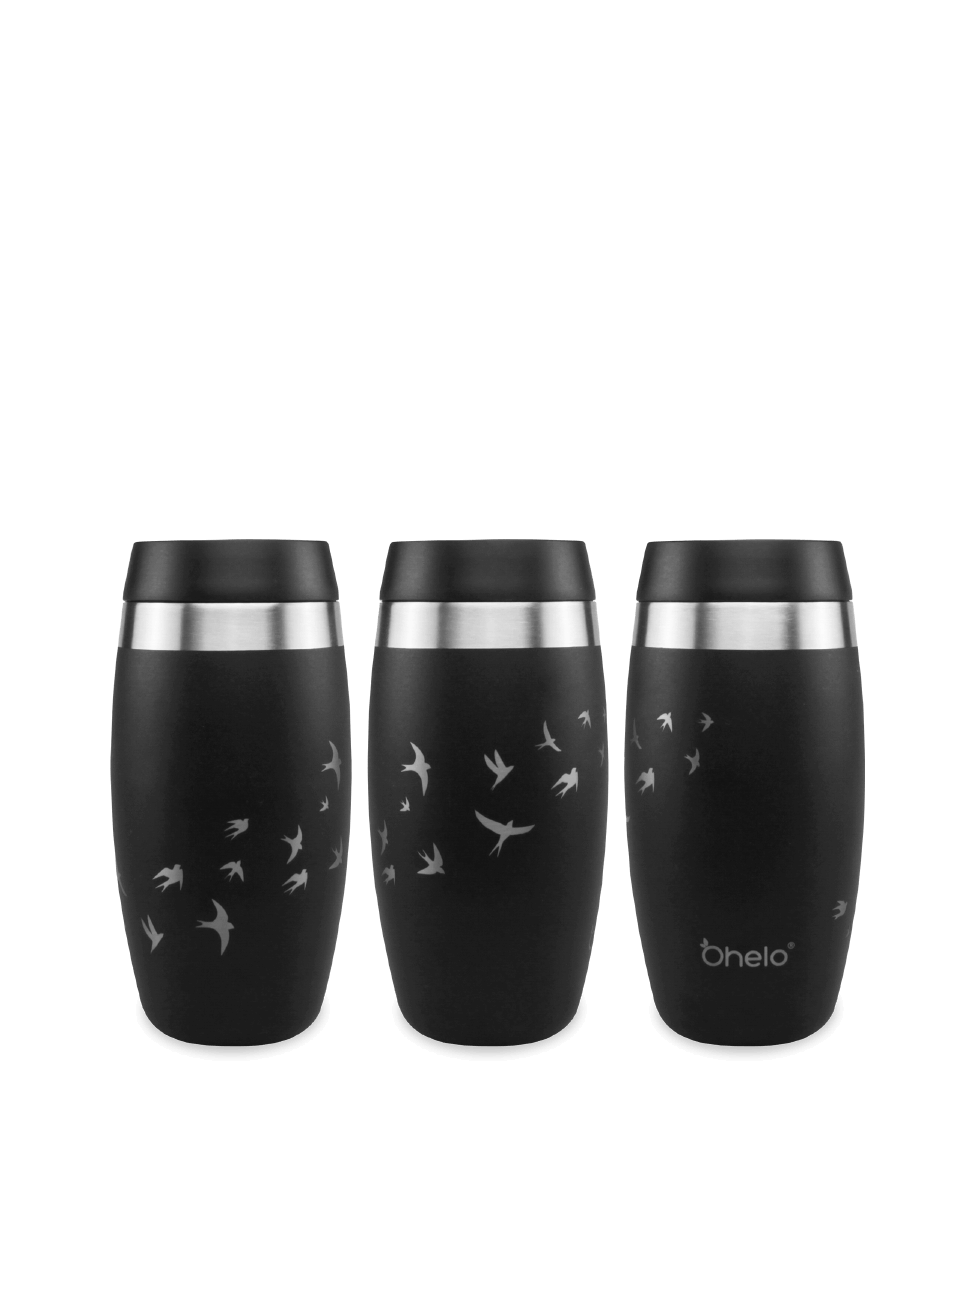 Ohelo black reusable coffee cup in swallow bird design - image showing design from 3 sides